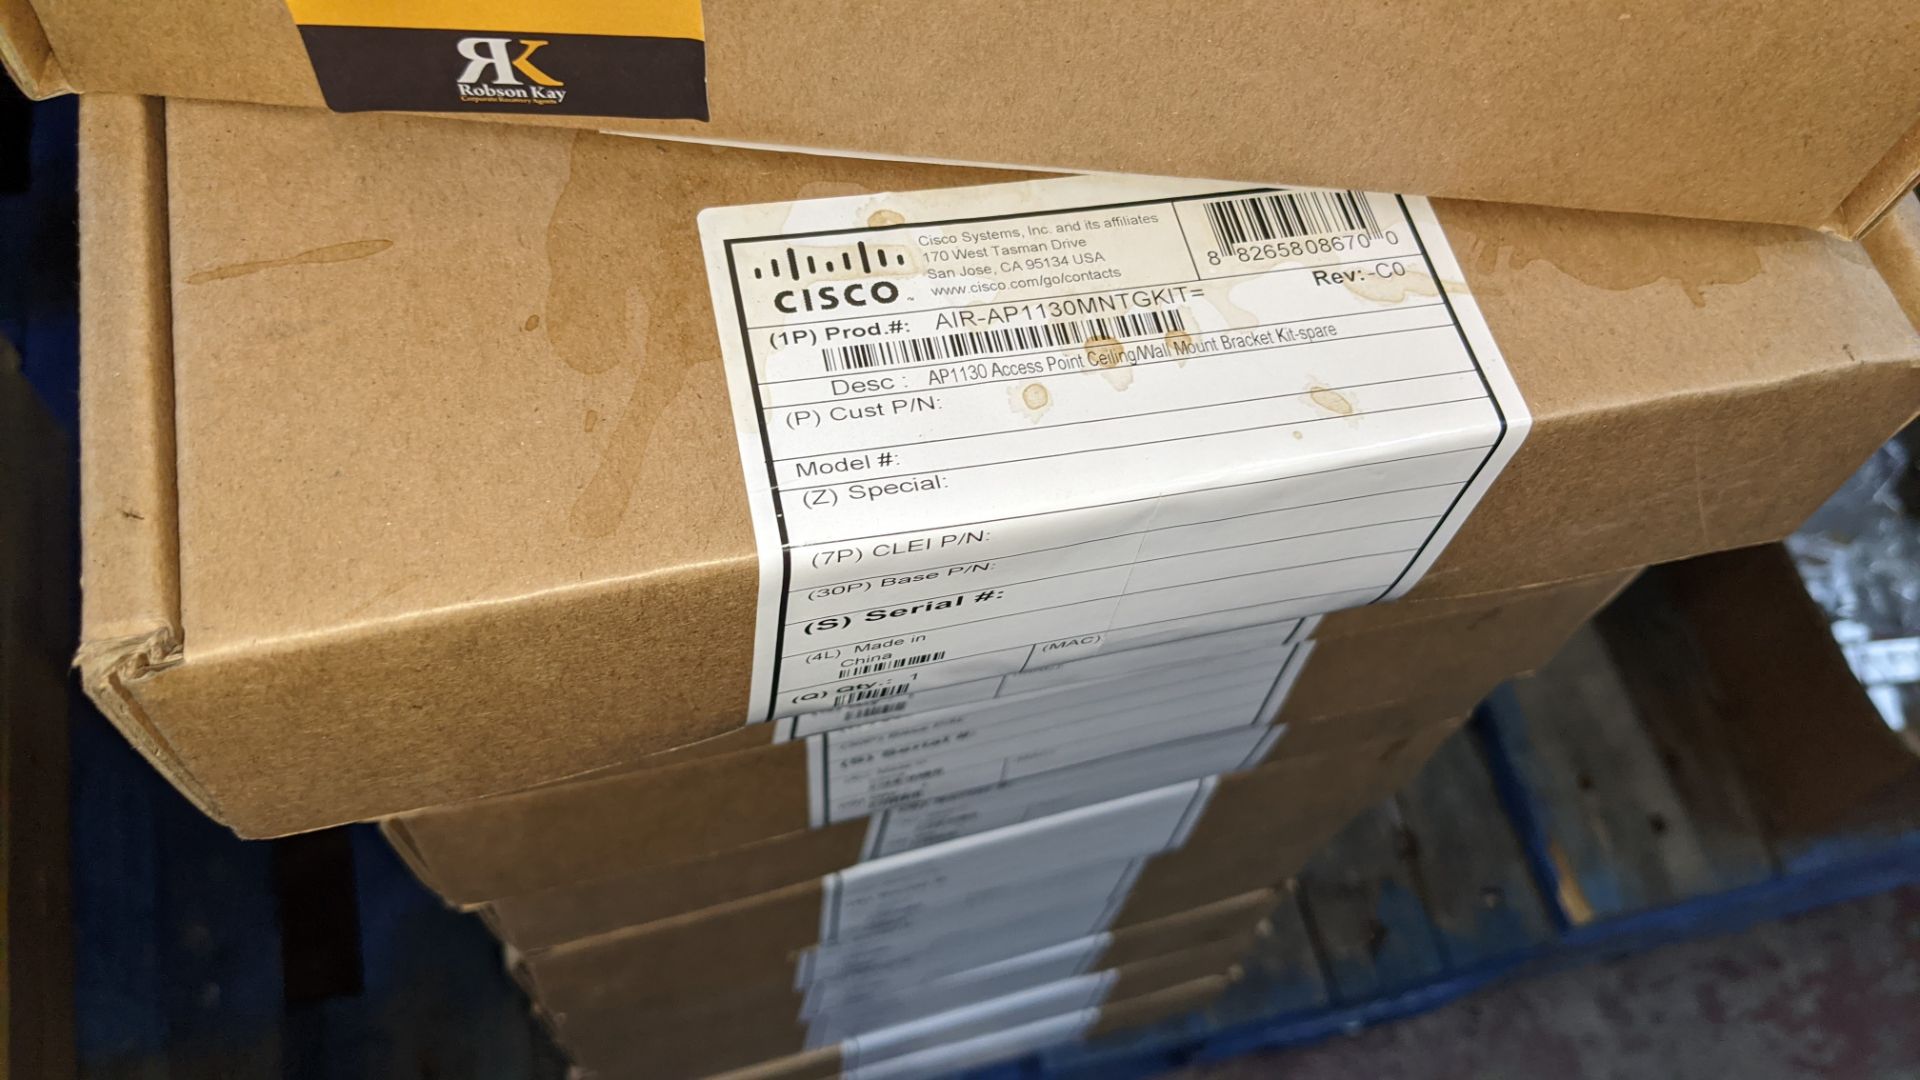 11 off Cisco Air Fixing kits model AIR-AP1130. All appear to be new & unused in Cisco branded boxes - Image 4 of 4